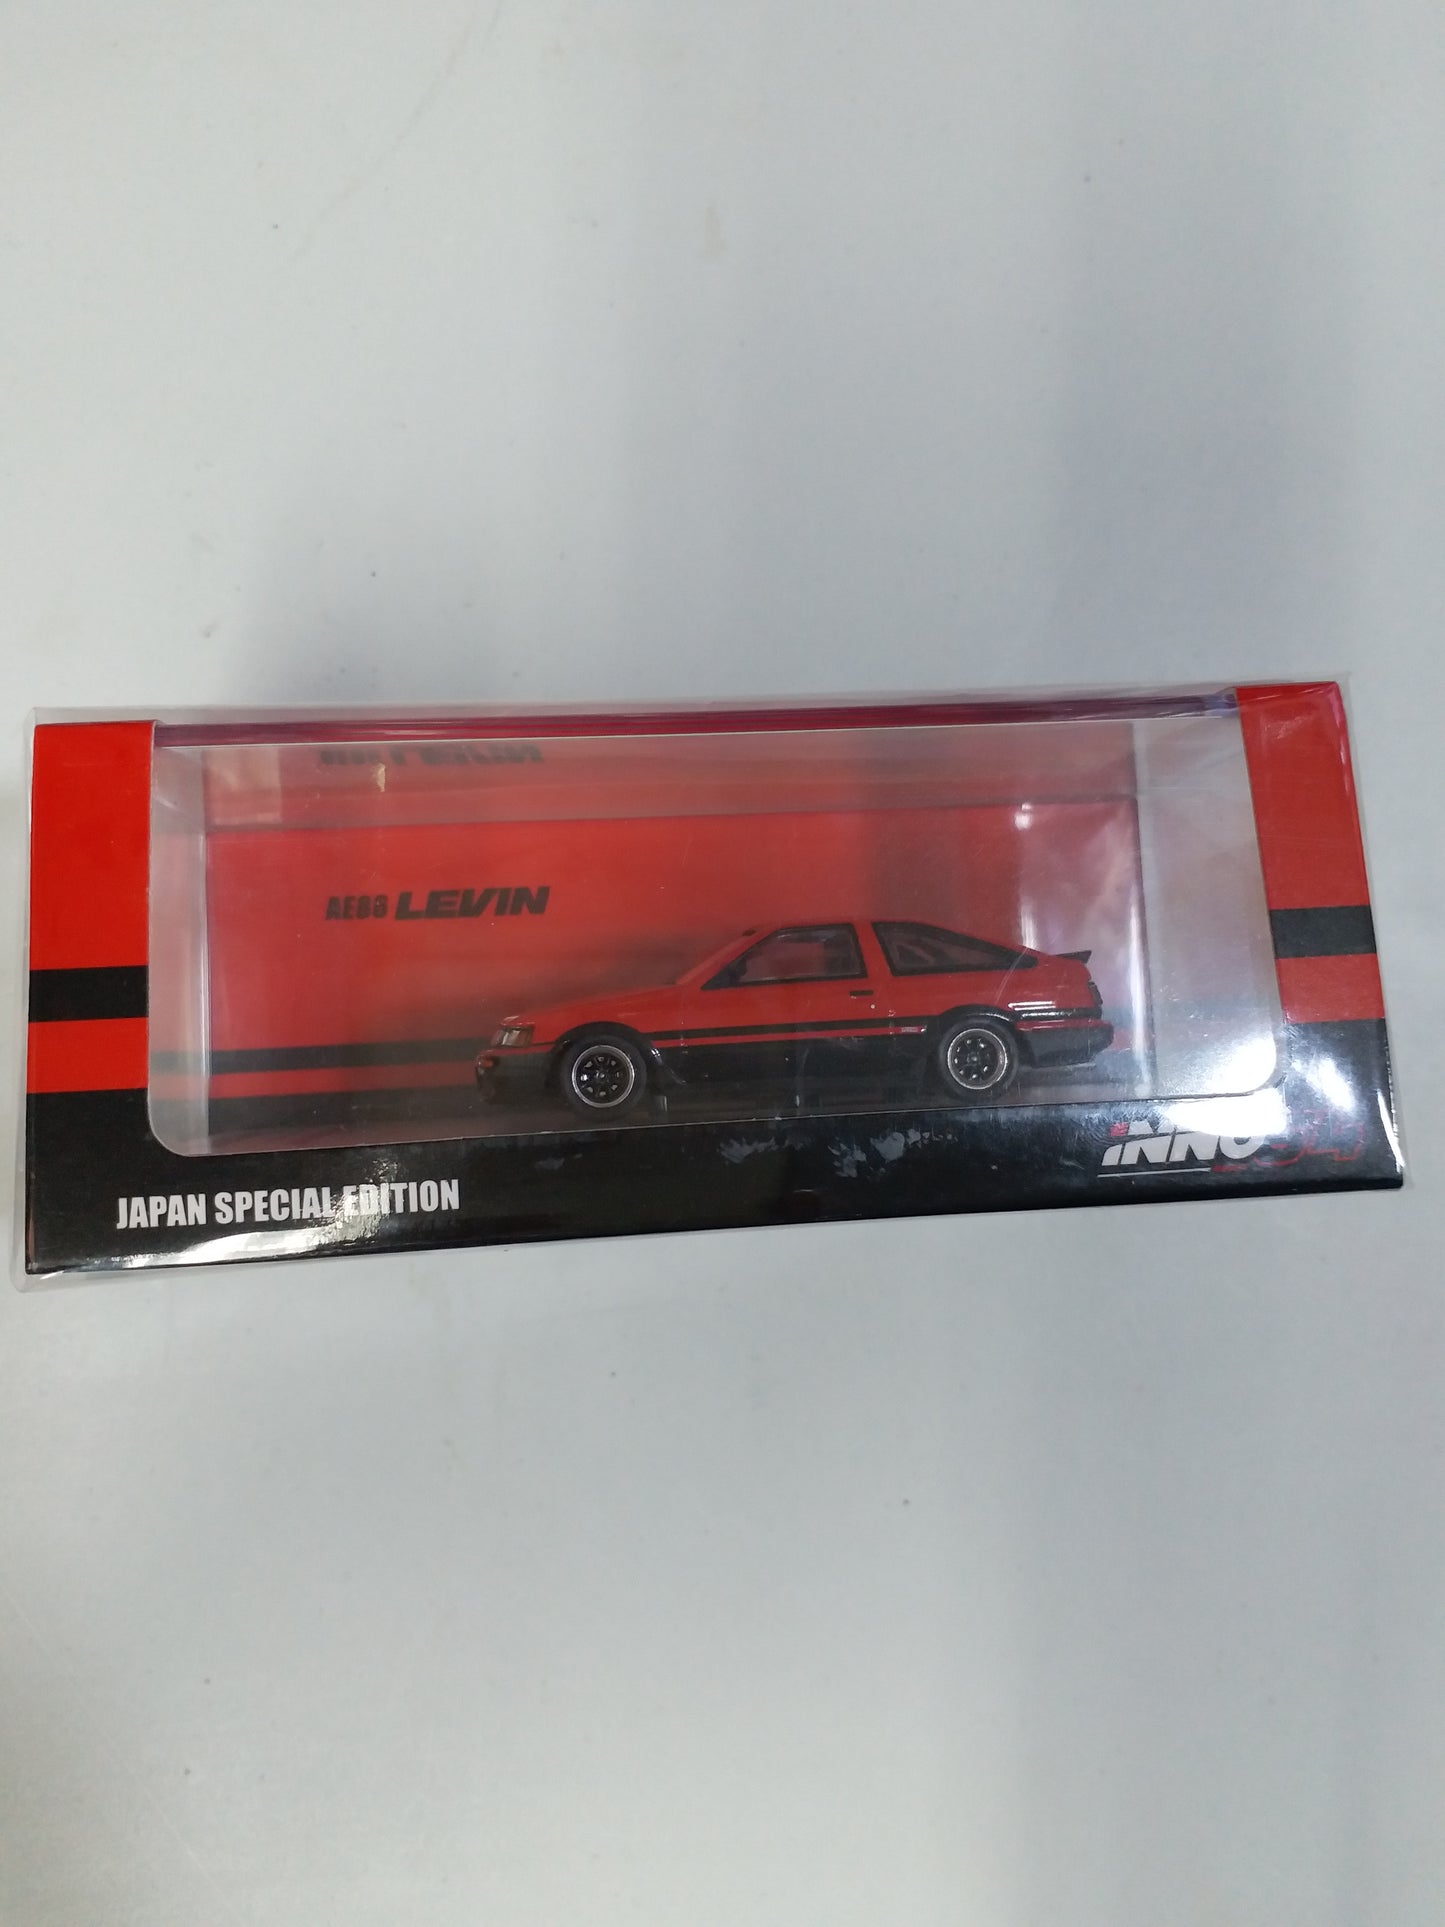 Inno64 1:64 Scale Toyota Corolla AE86 Levin Red Japan Special Edition